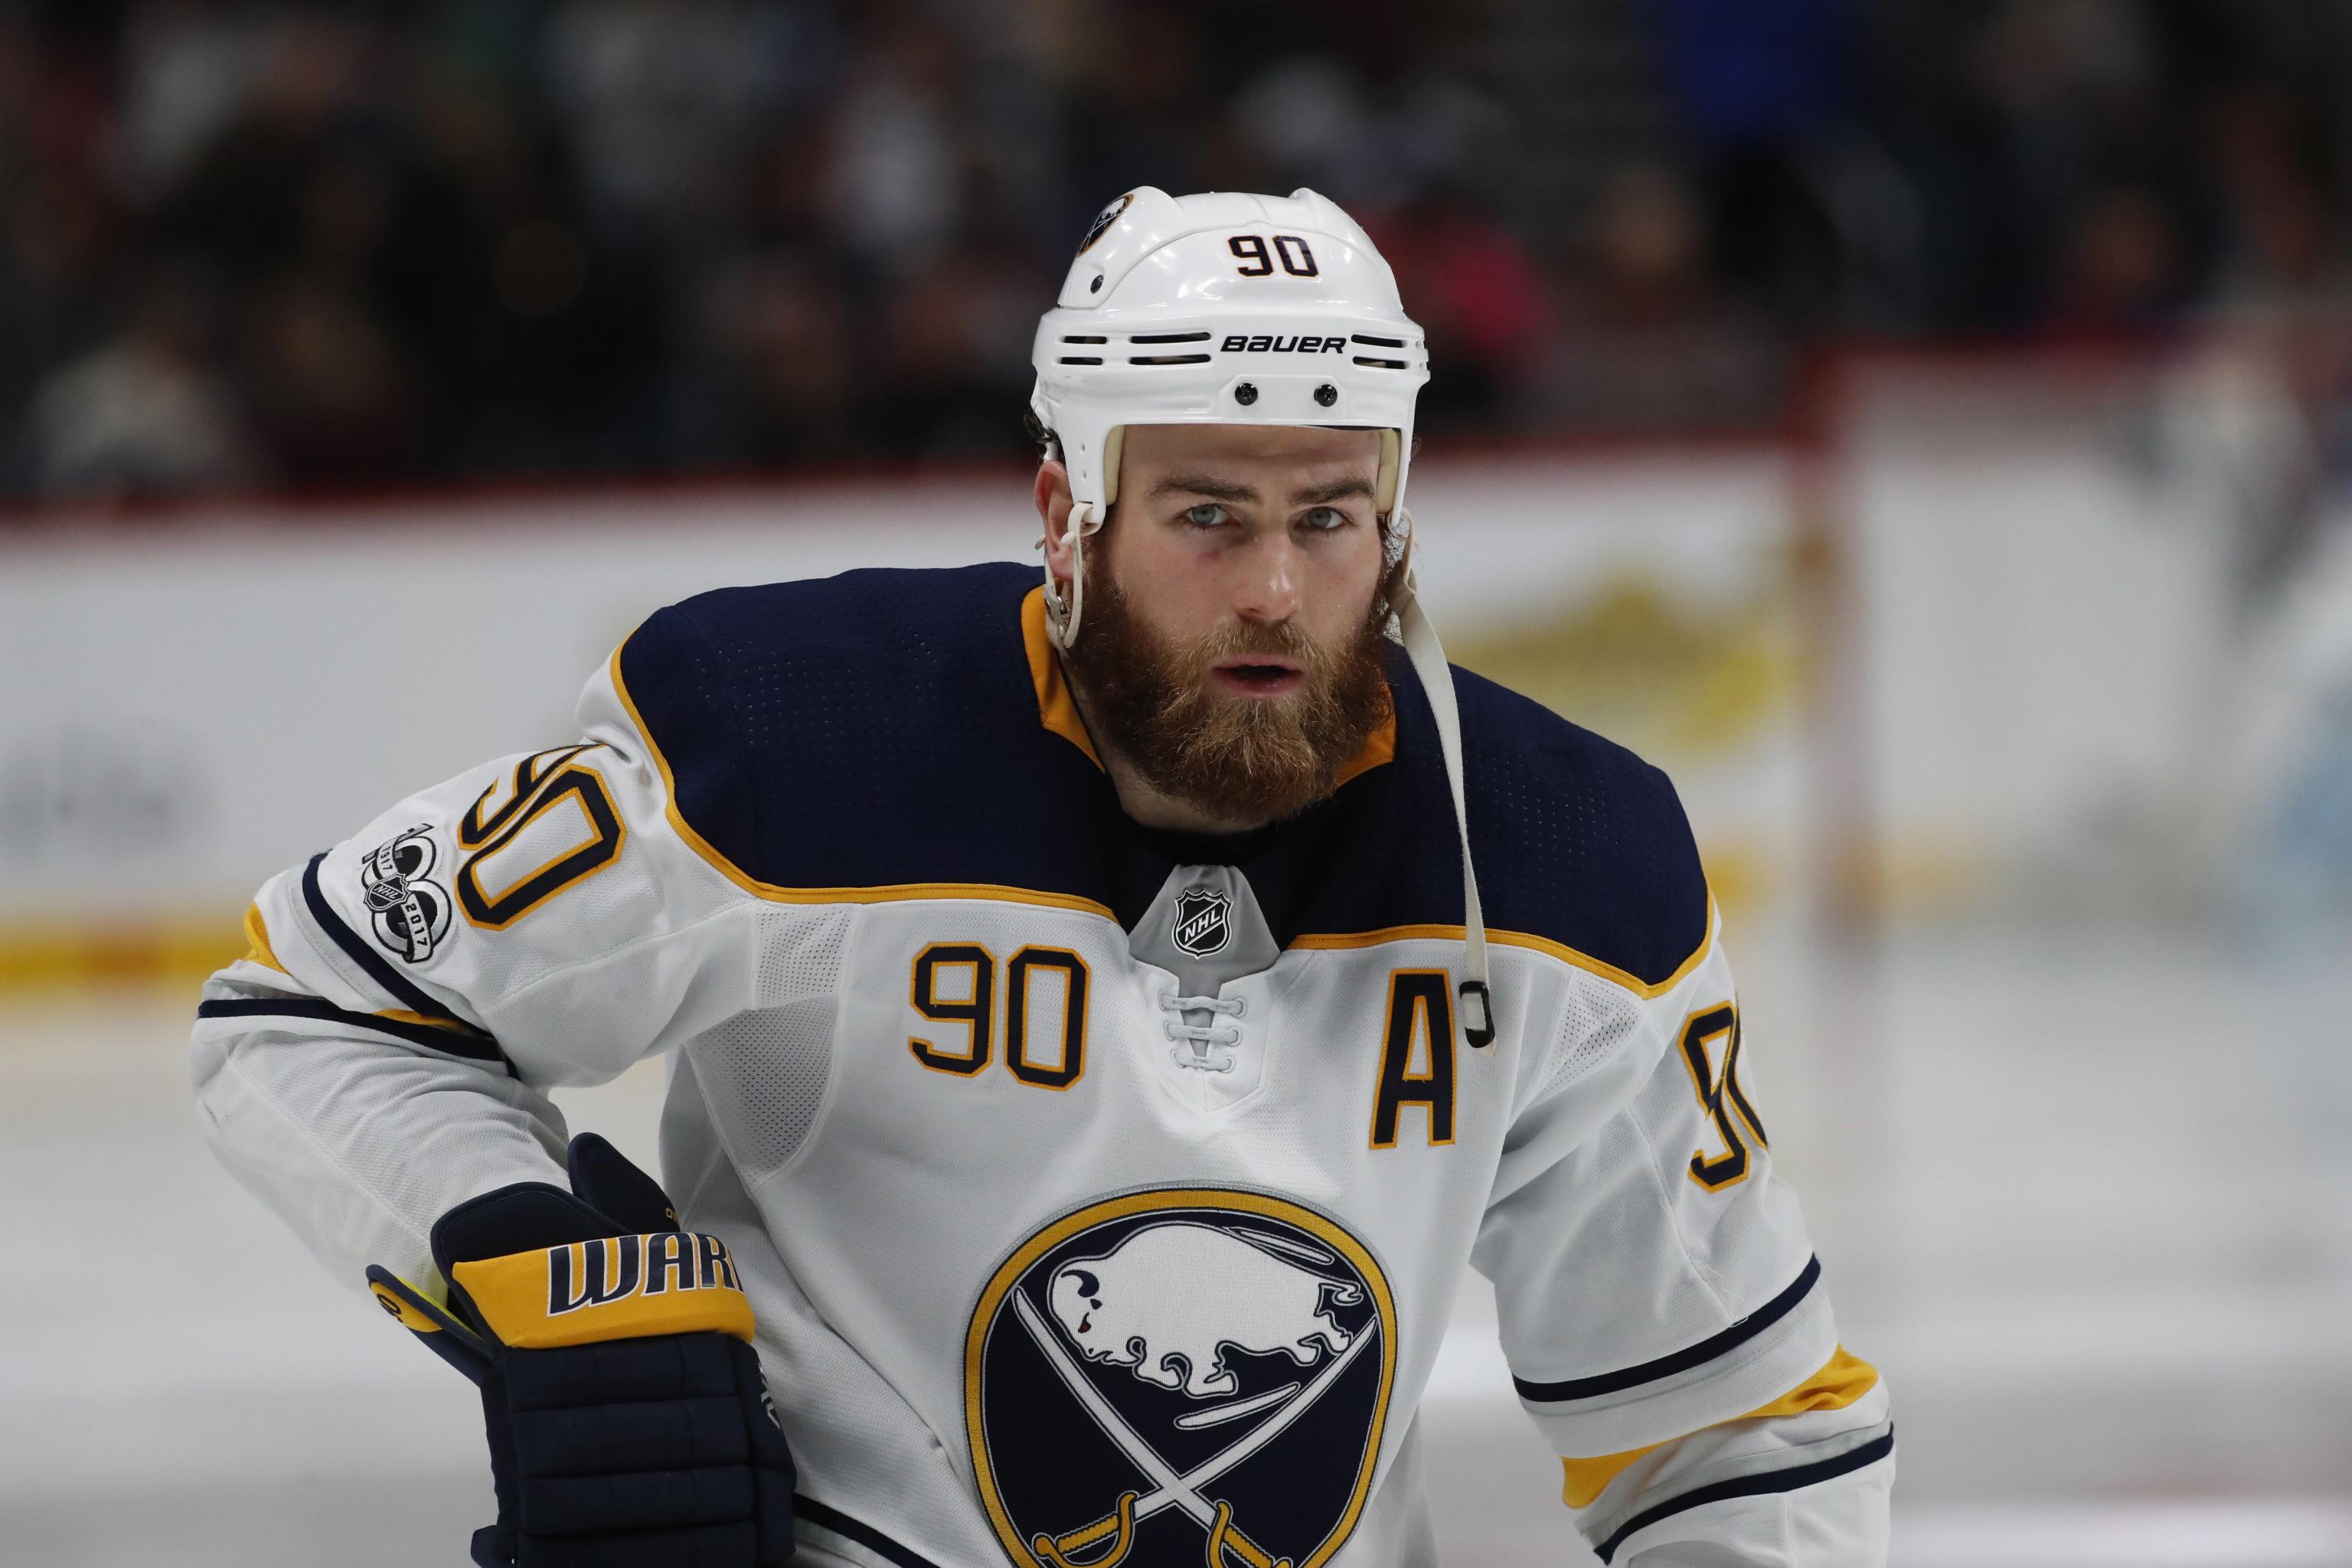 All 24 of Ryan O'Reilly's Goals from the 2021 Reg. Season